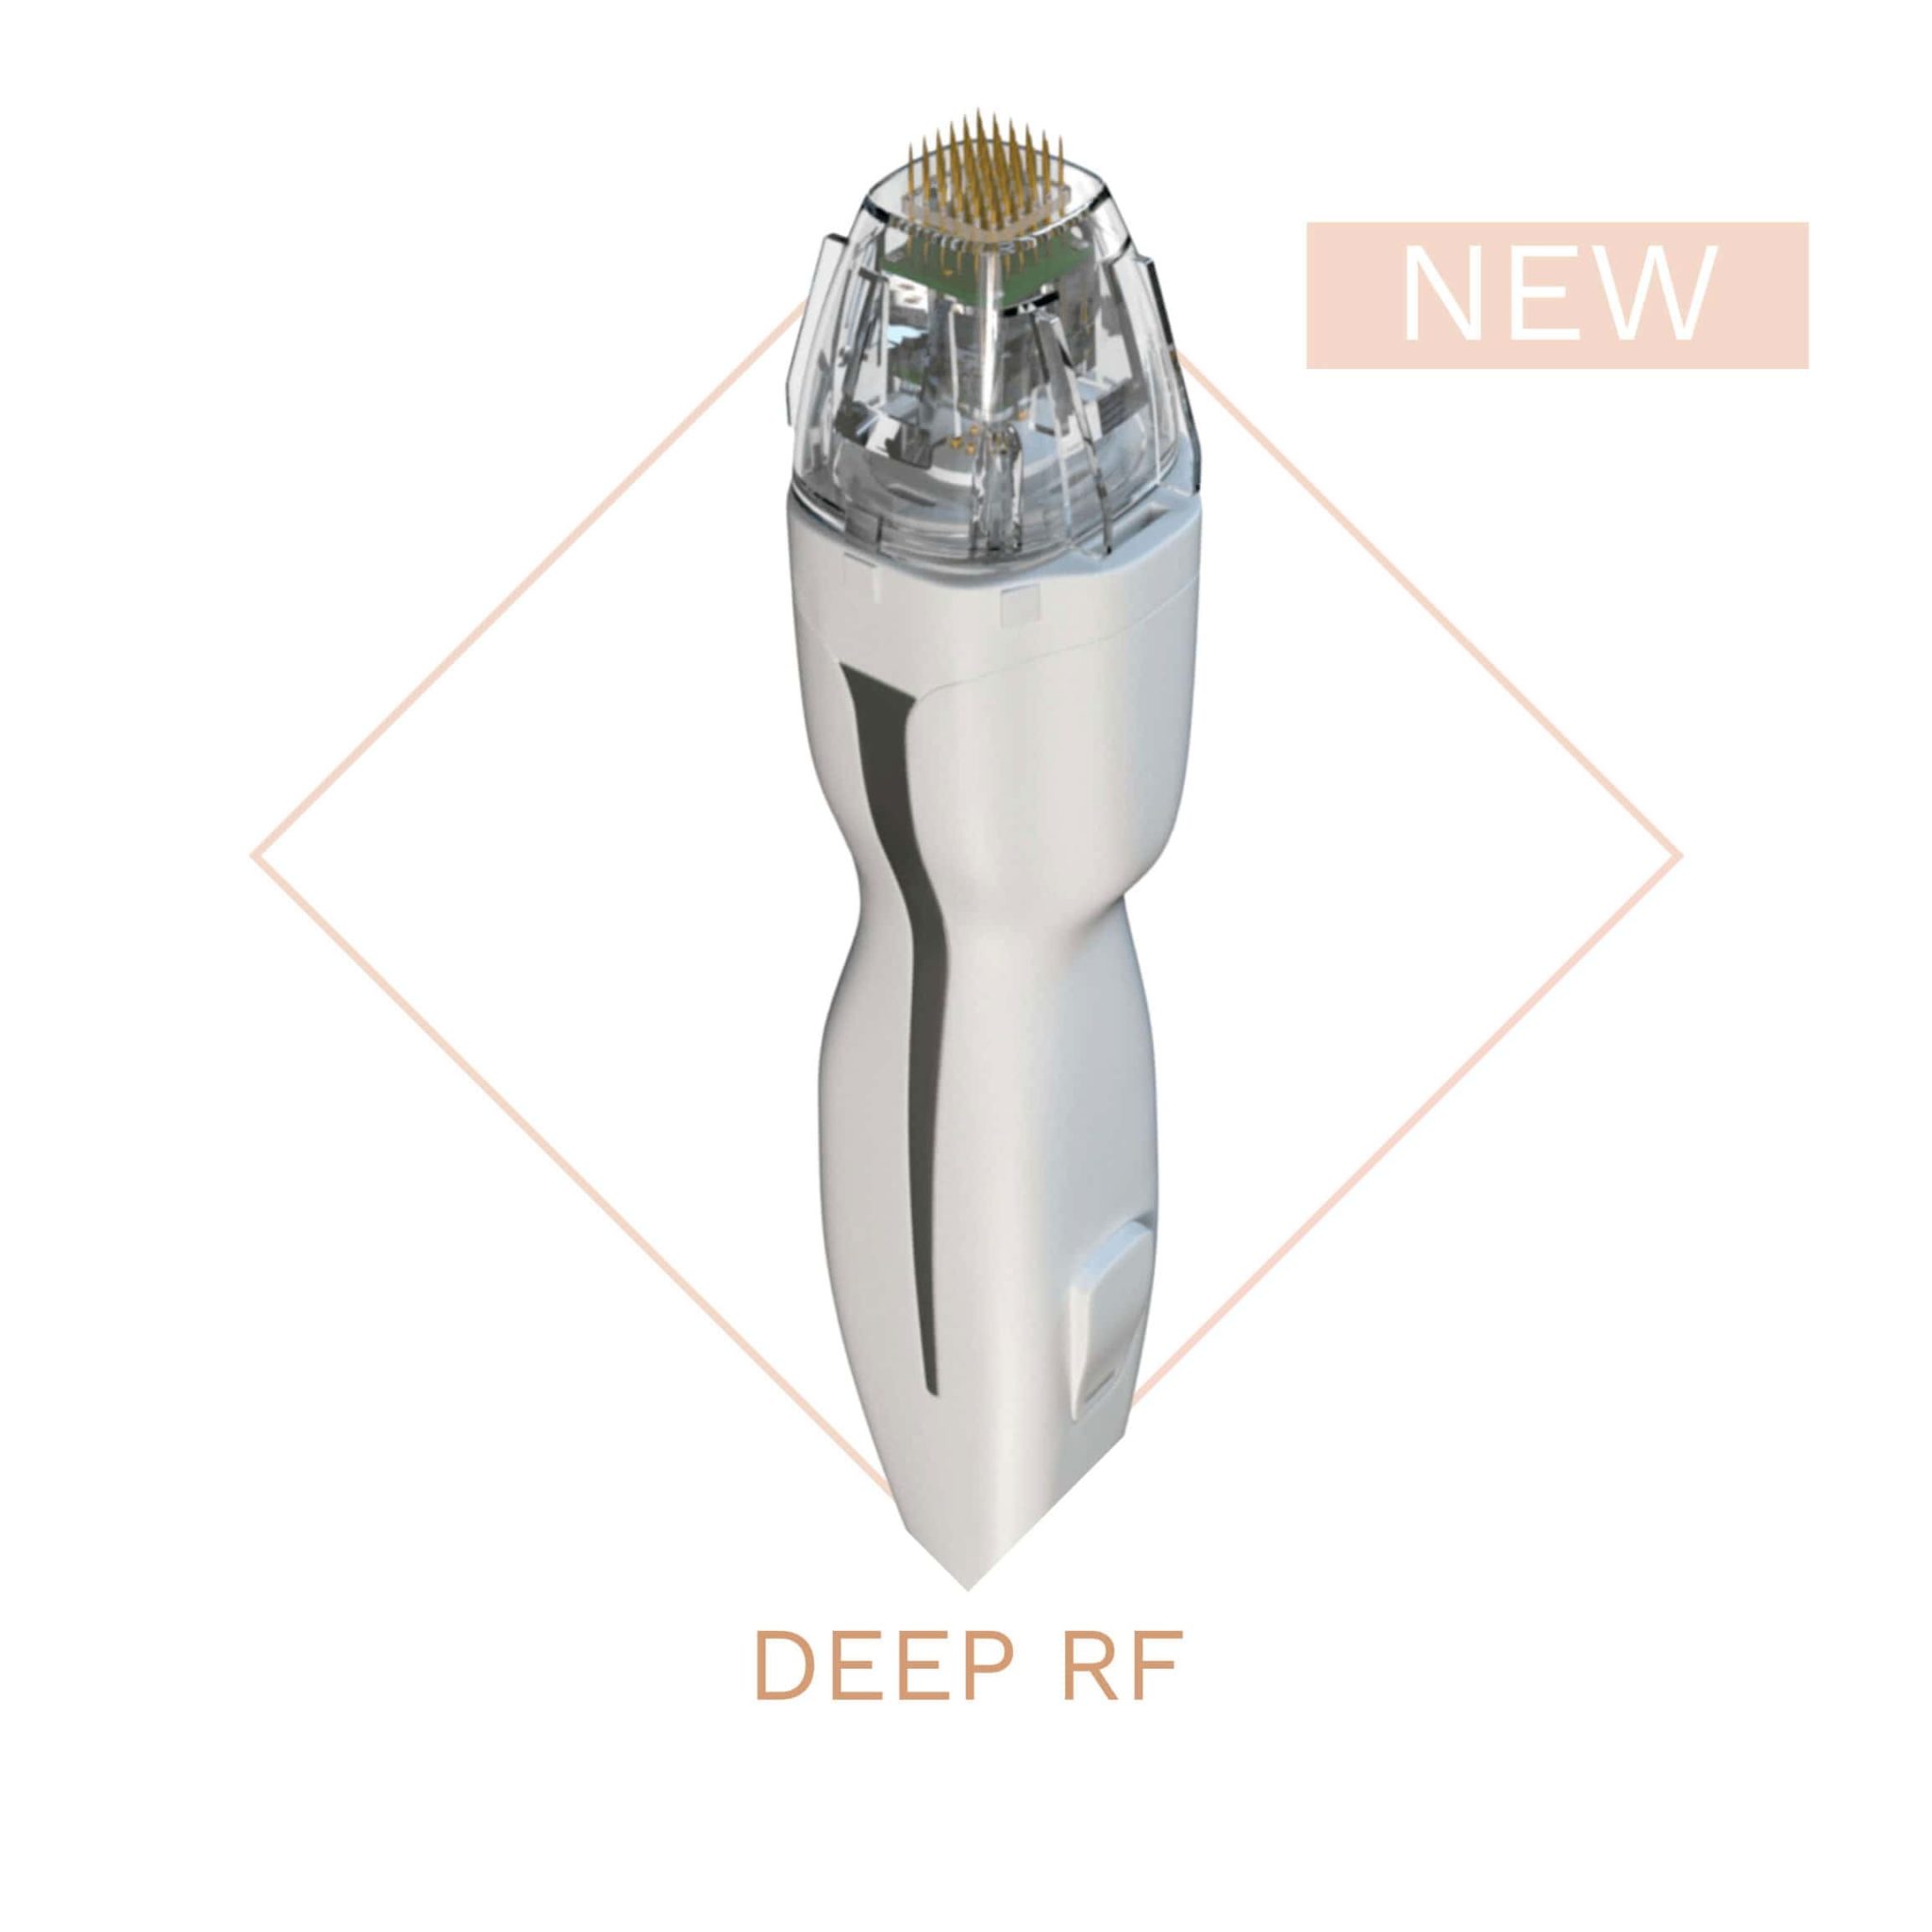 Deep RF perfect to treat face and body scars, stretch marks and also perfect to tighten skin anywhere